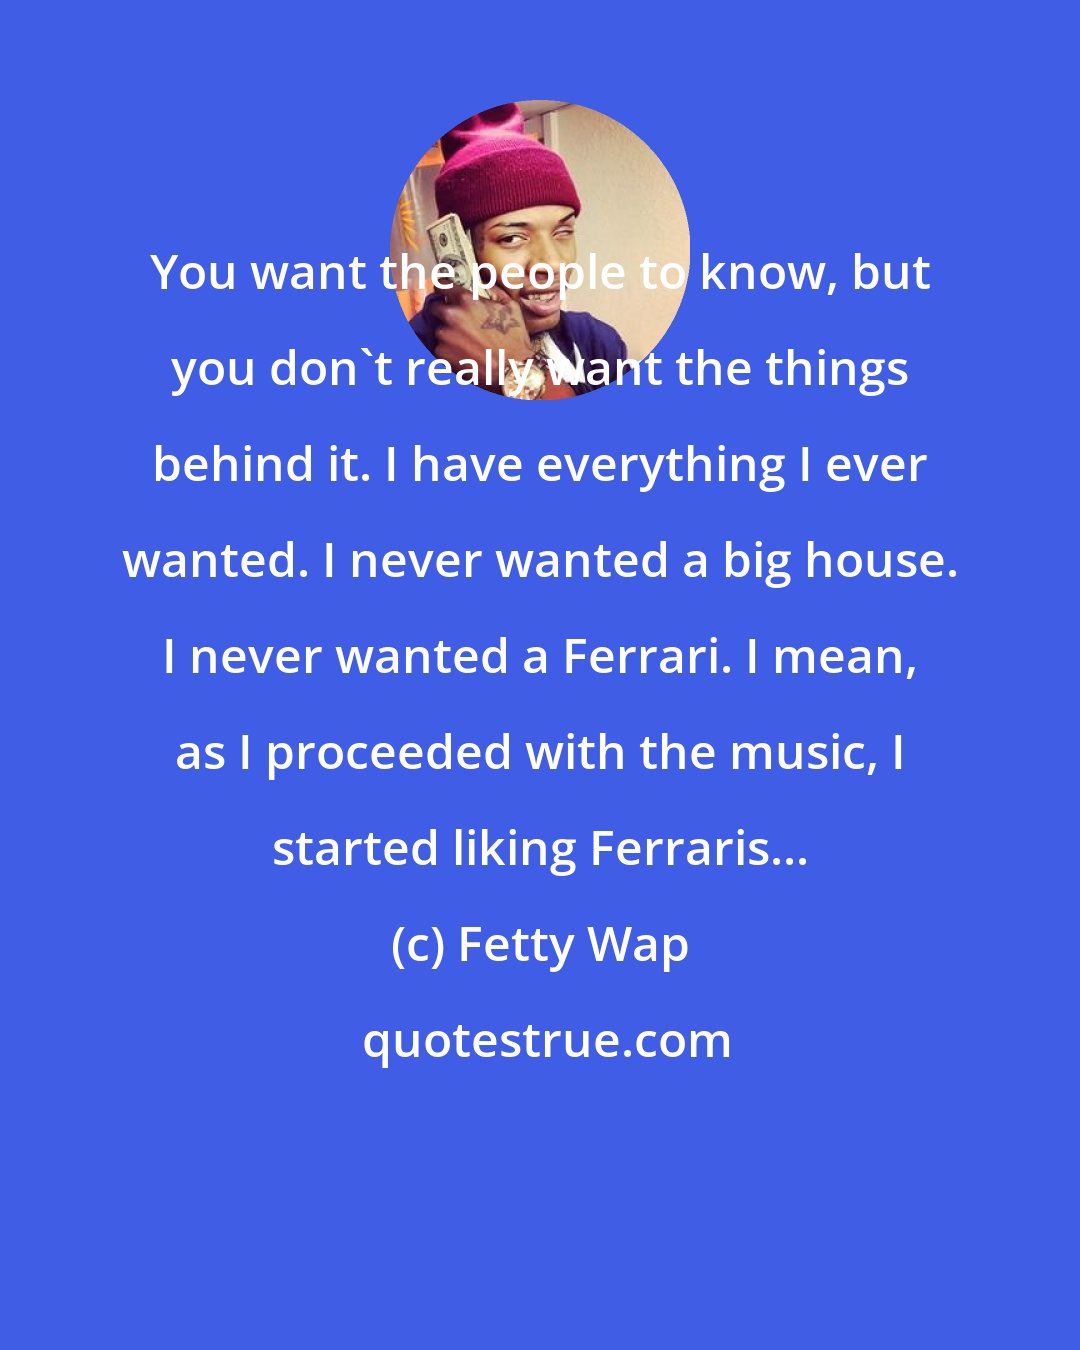 Fetty Wap: You want the people to know, but you don't really want the things behind it. I have everything I ever wanted. I never wanted a big house. I never wanted a Ferrari. I mean, as I proceeded with the music, I started liking Ferraris...